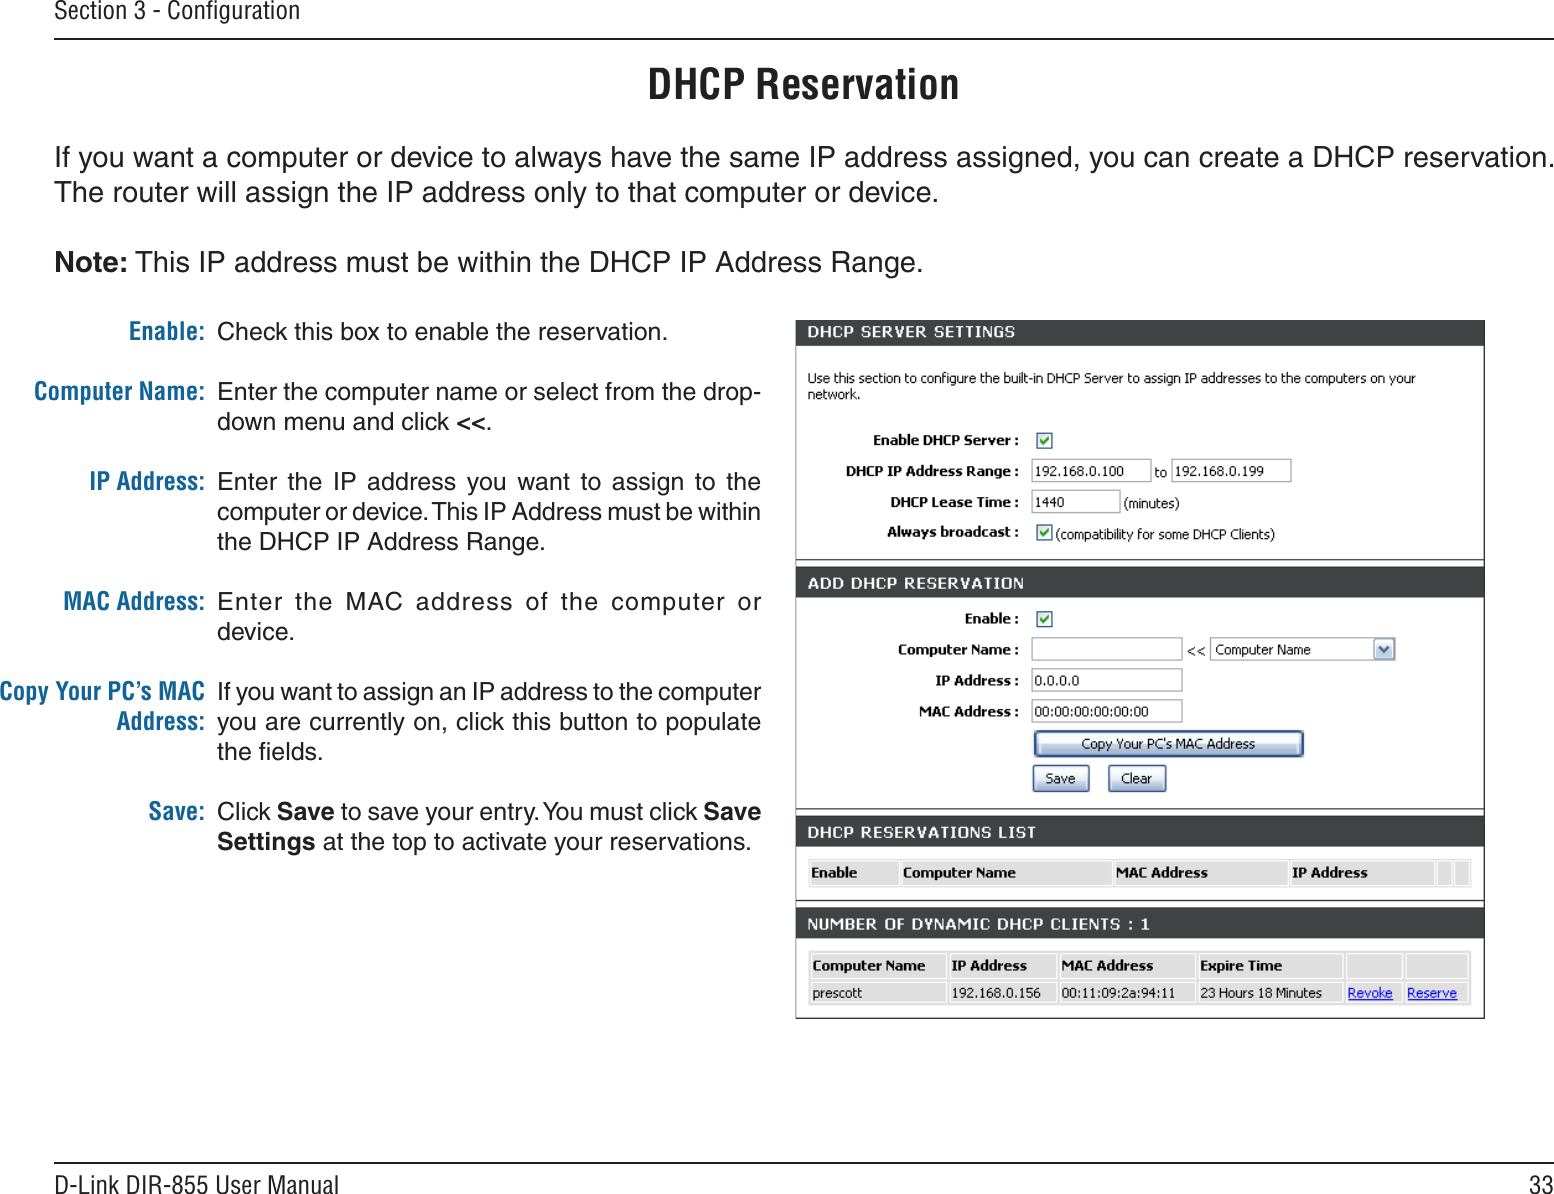 33D-Link DIR-855 User ManualSection 3 - ConﬁgurationDHCP ReservationIf you want a computer or device to always have the same IP address assigned, you can create a DHCP reservation. The router will assign the IP address only to that computer or device. Note: This IP address must be within the DHCP IP Address Range.Check this box to enable the reservation.Enter the computer name or select from the drop-down menu and click &lt;&lt;.Enter  the  IP  address  you  want  to  assign  to  the computer or device. This IP Address must be within the DHCP IP Address Range.Enter  the  MAC address  of  the  computer  or device.If you want to assign an IP address to the computer you are currently on, click this button to populate the ﬁelds. Click Save to save your entry. You must click Save Settings at the top to activate your reservations. Enable:Computer Name:IP Address:MAC Address:Copy Your PC’s MAC Address:Save: